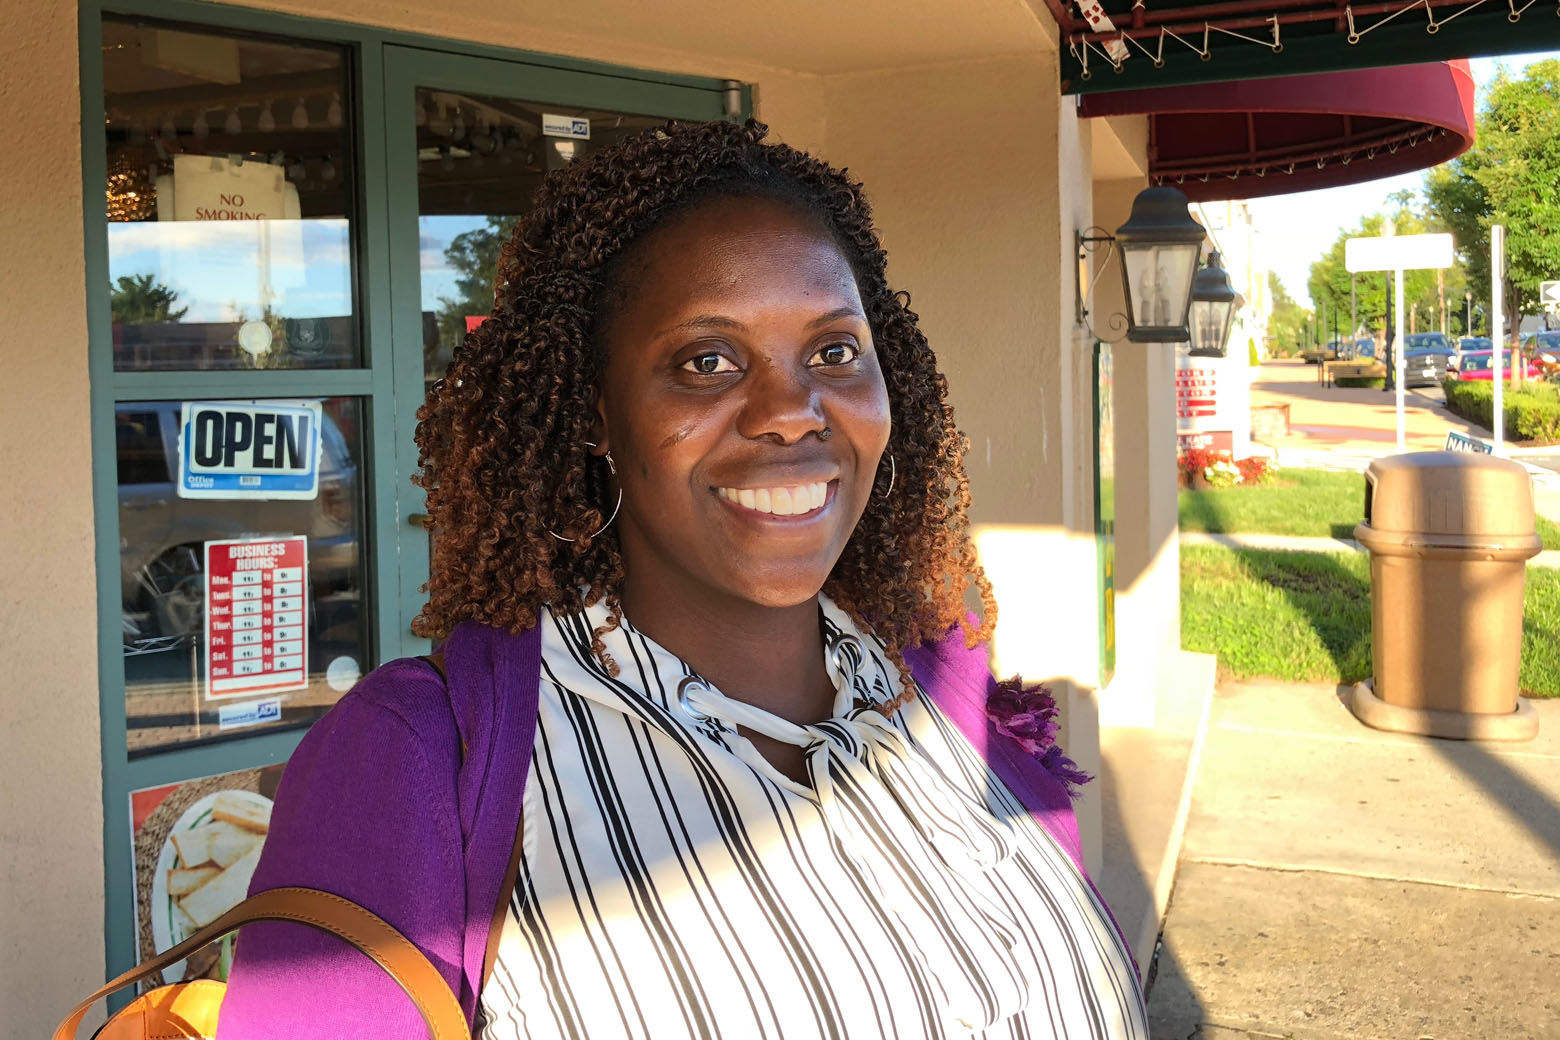 Amoye Taylor of Montgomery Village says school safety is a priority for her. Taylor says she’s not sure who will get her vote. Like many of the Marylanders WTOP spoke to, she insists she considers positions over party when deciding who should get her vote. (WTOP/Kate Ryan)